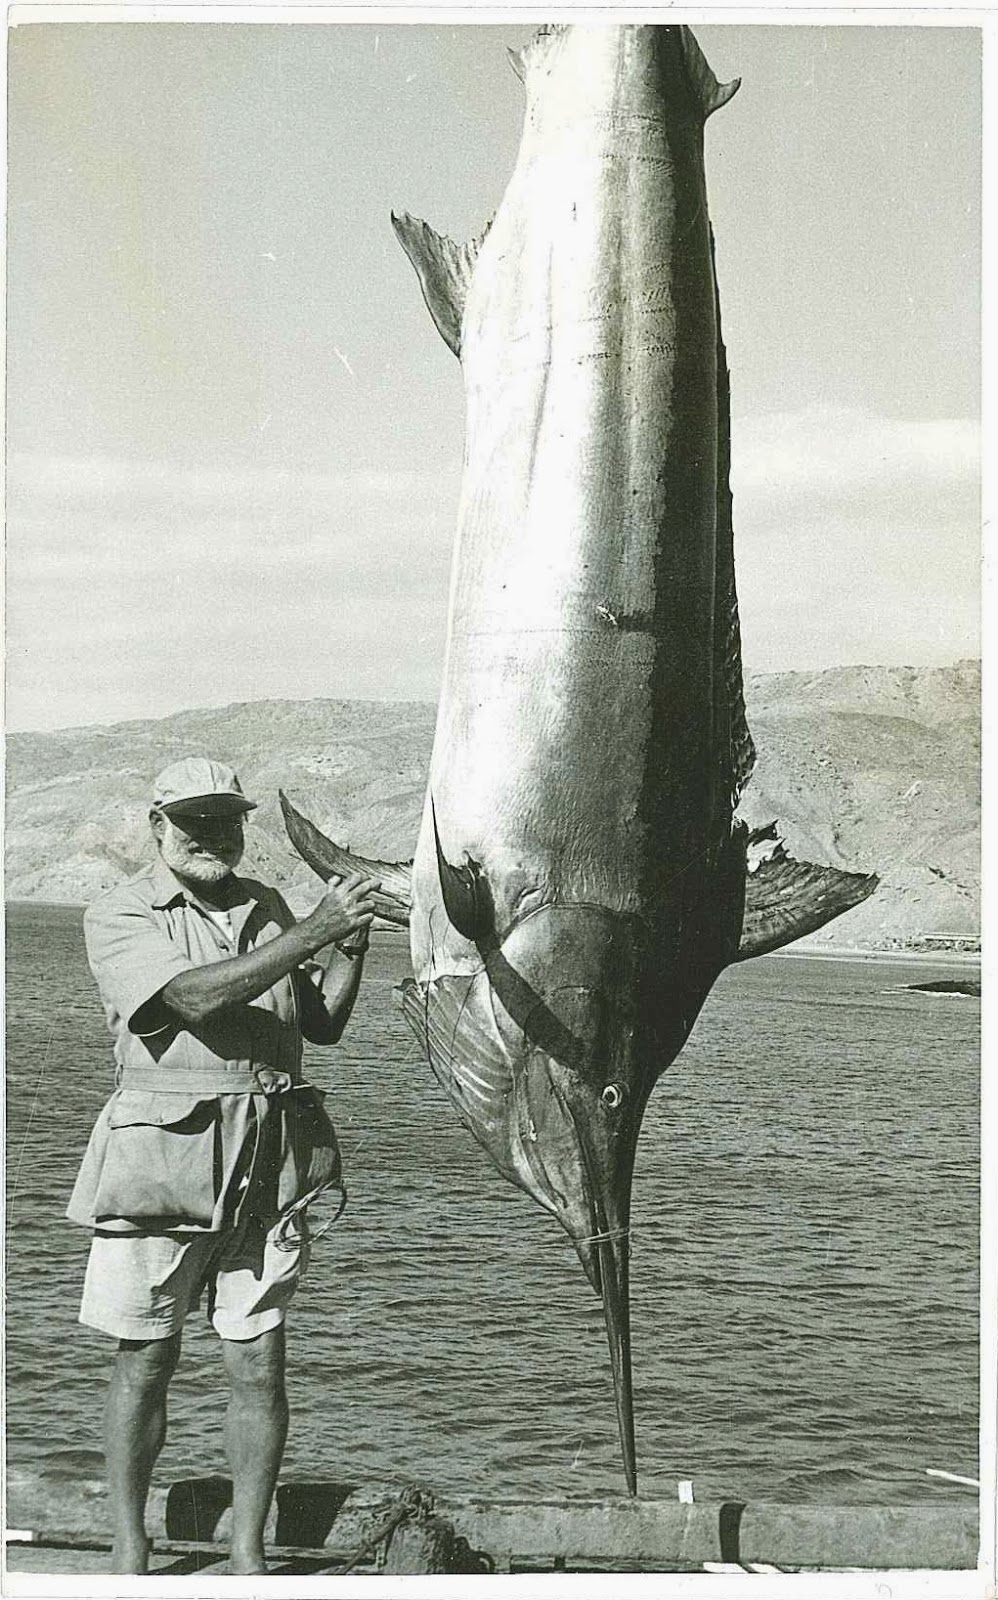 A black and white photograph of Hemingway next to a hanging marlin.